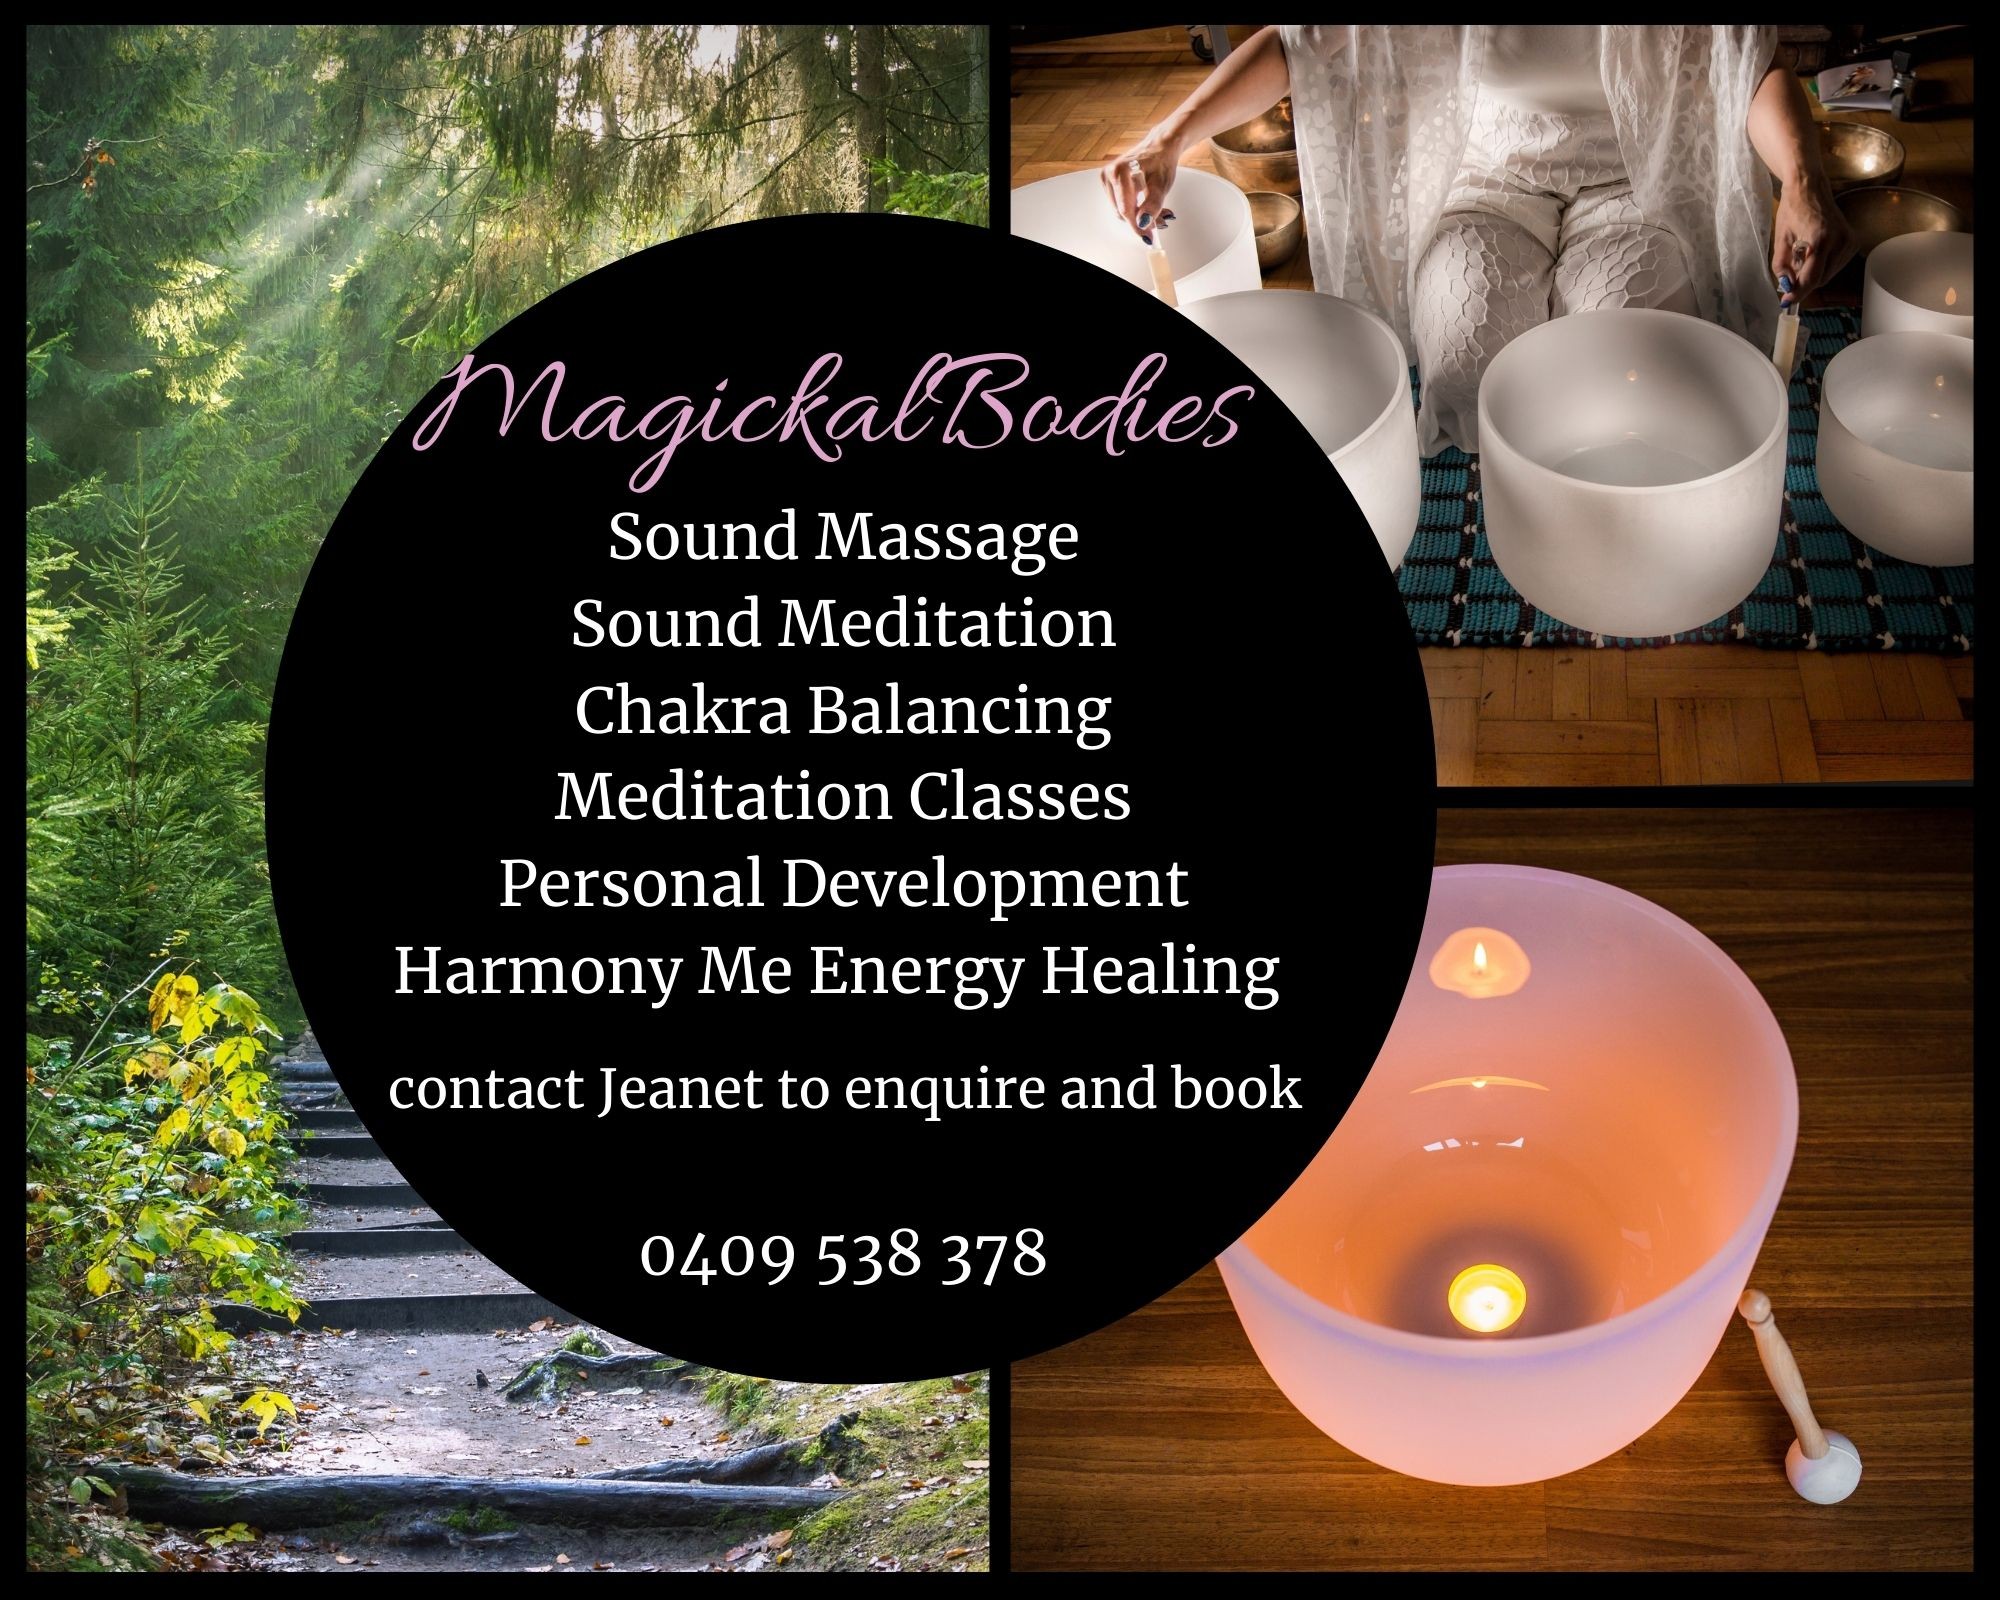 Magickal Bodies therapist on Natural Therapy Pages